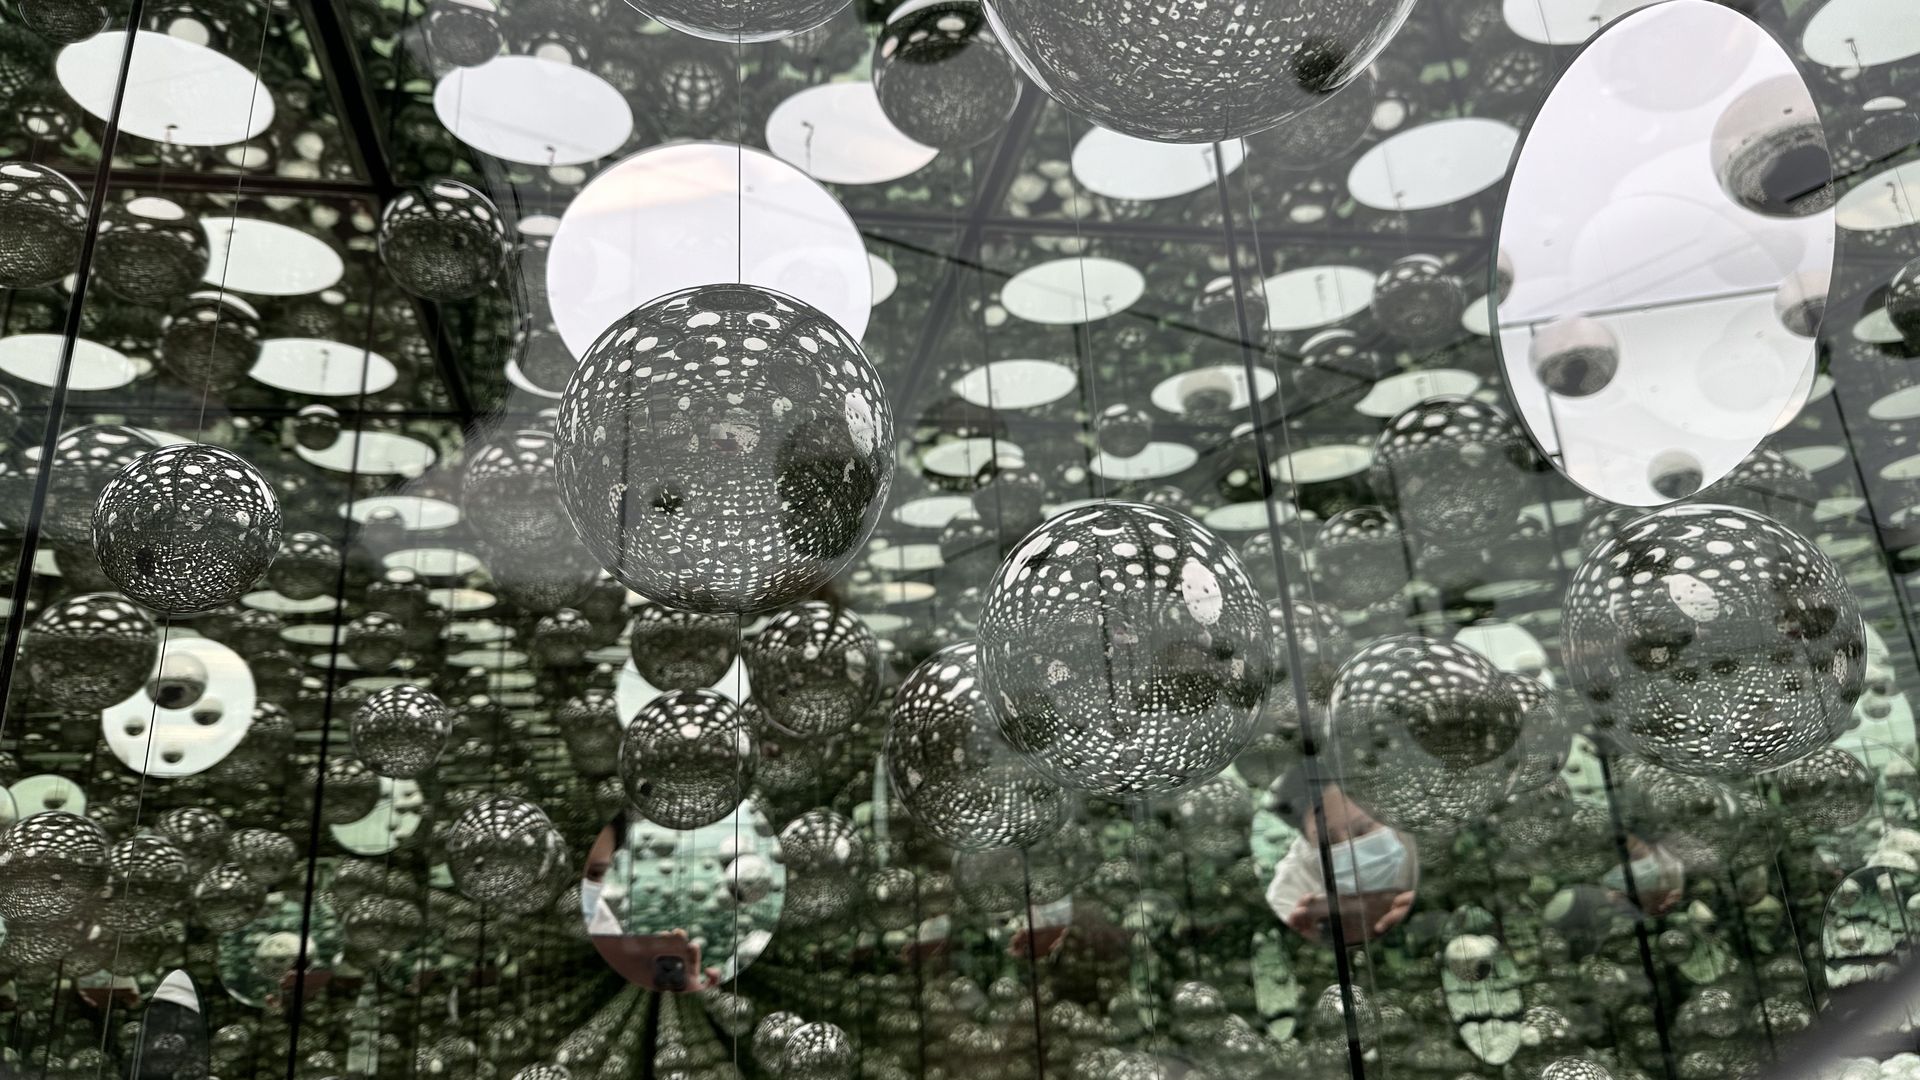 As part of an art installation by Yayoi Kusama, the view inside a mirrored box within a mirrored room, both filled with stainless steel, inflatable spheres. 